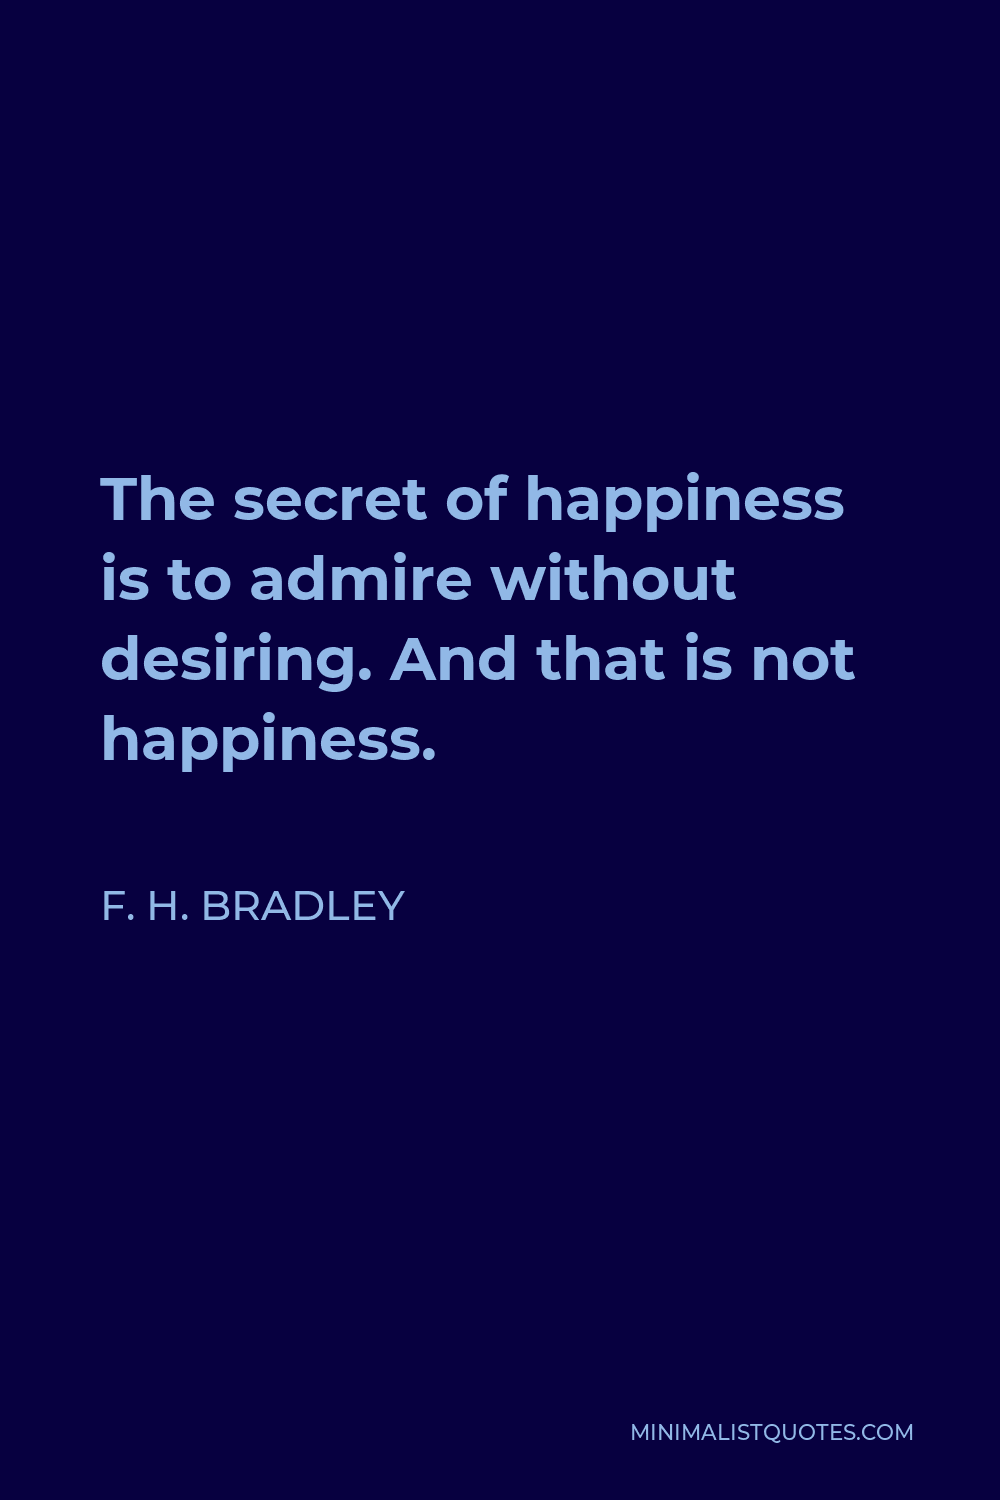 F. H. Bradley Quote - The secret of happiness is to admire without desiring. And that is not happiness.